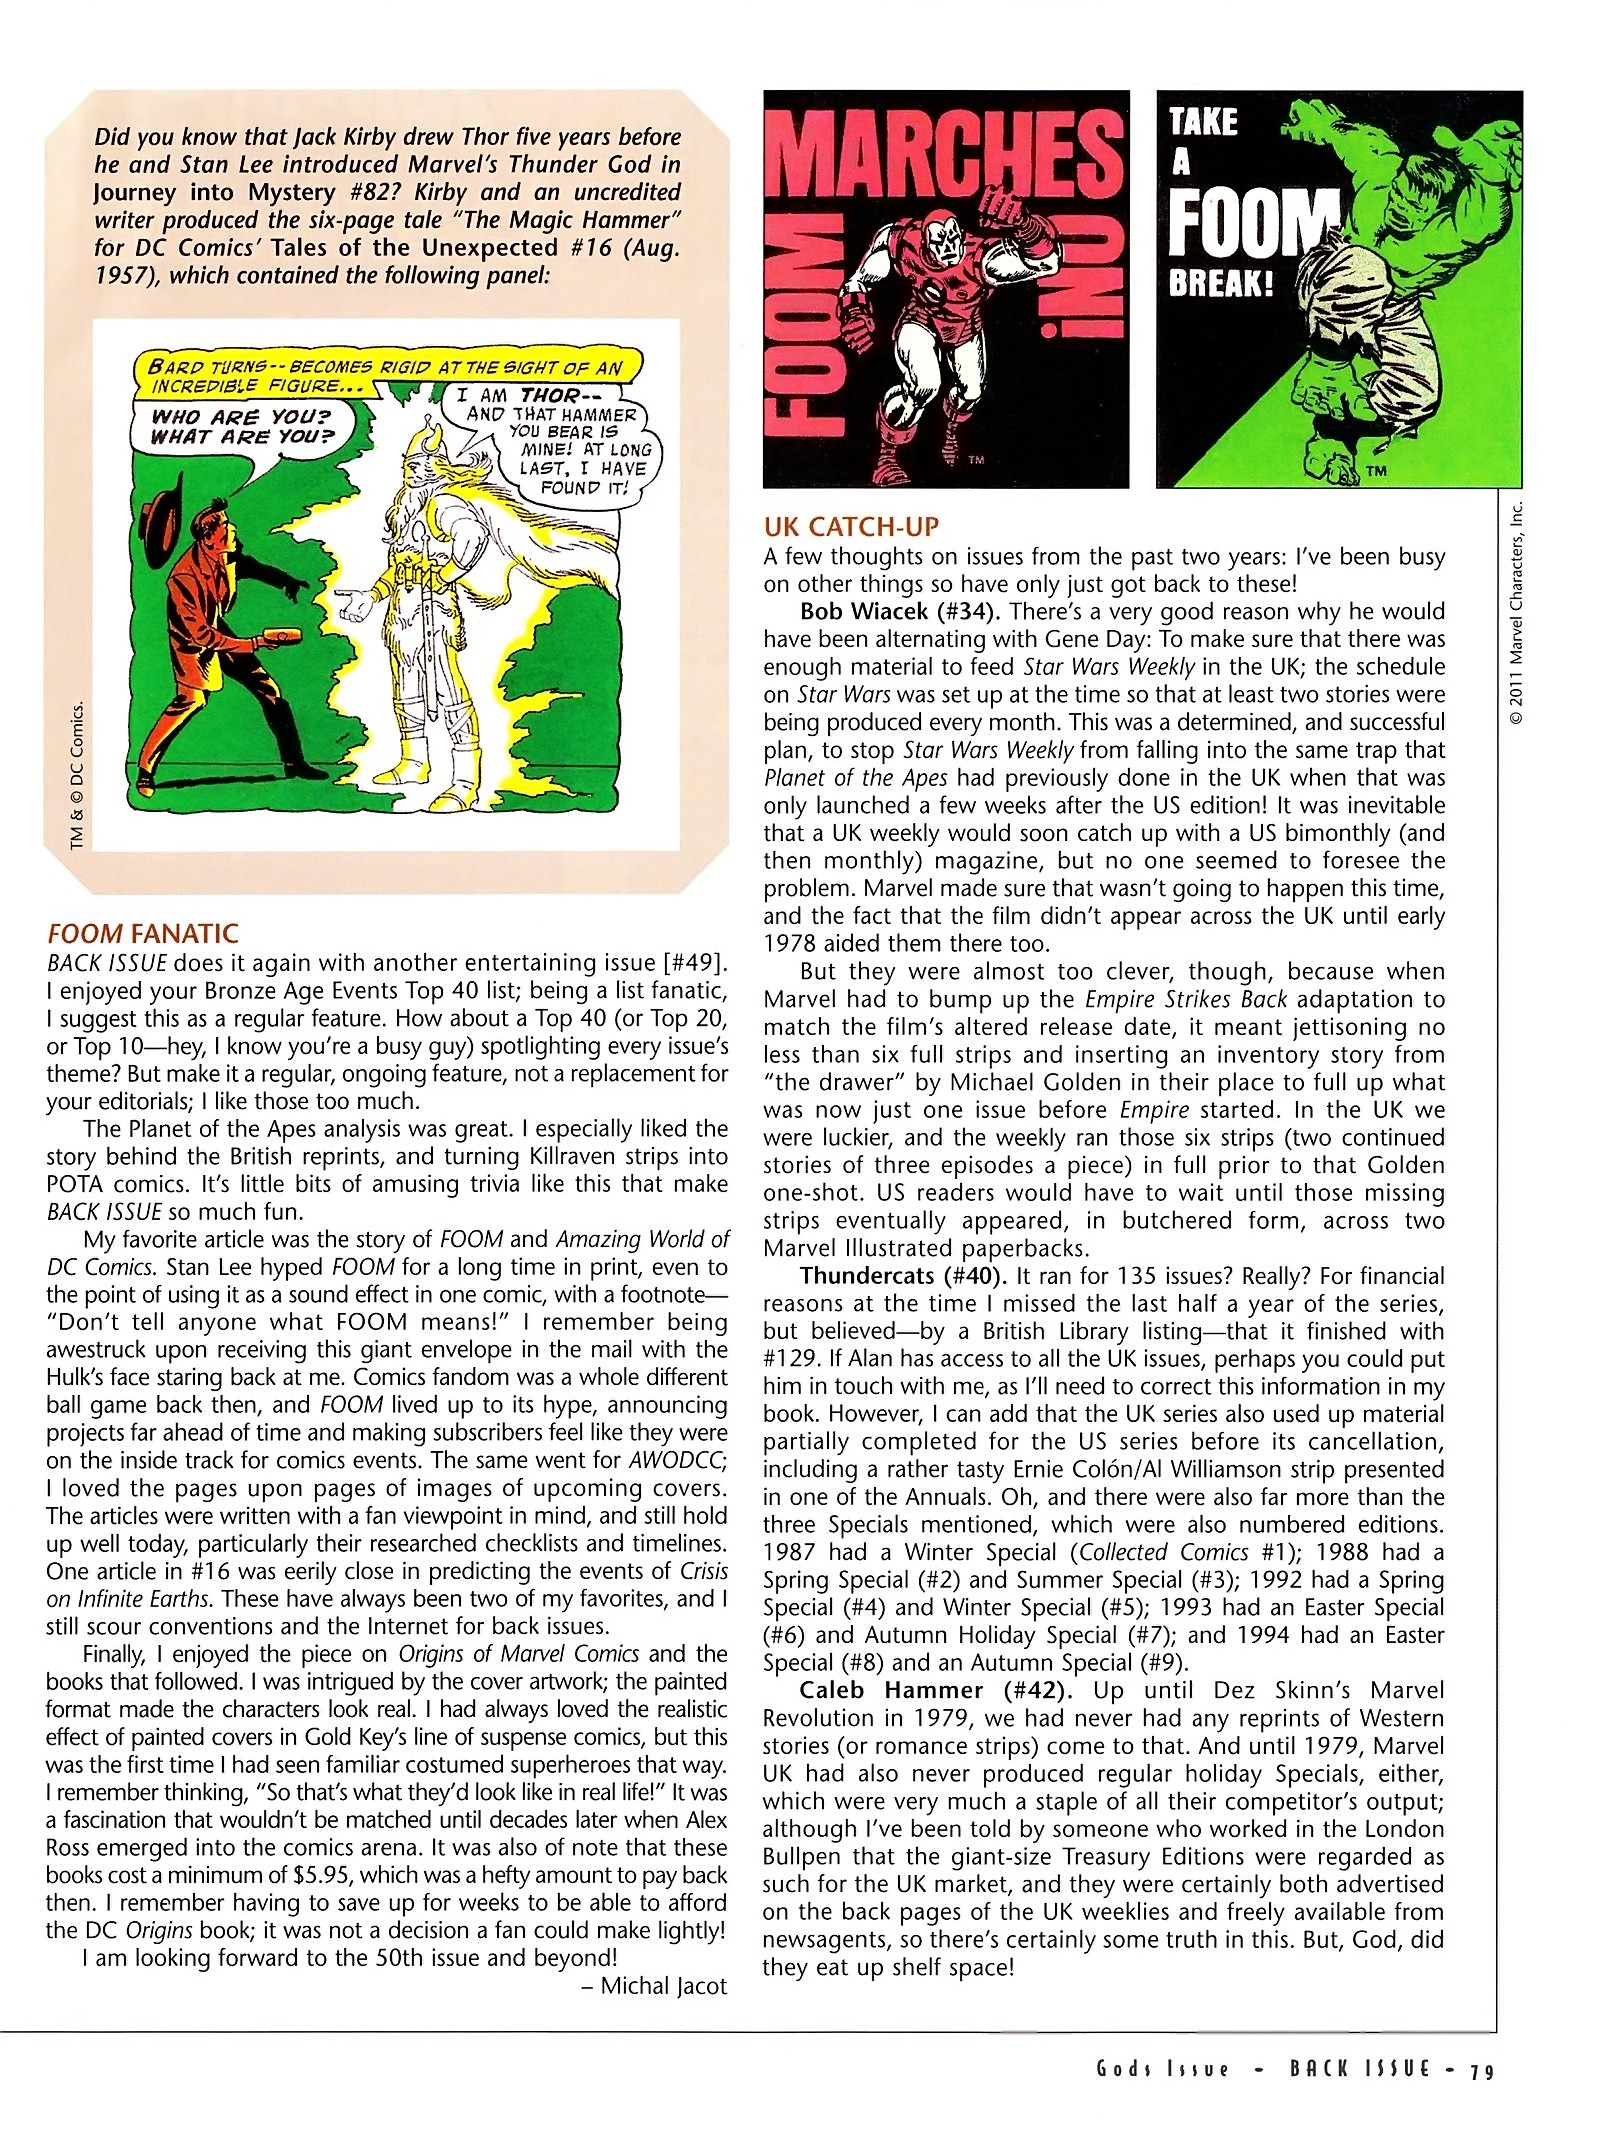 Read online Back Issue comic -  Issue #53 - 80